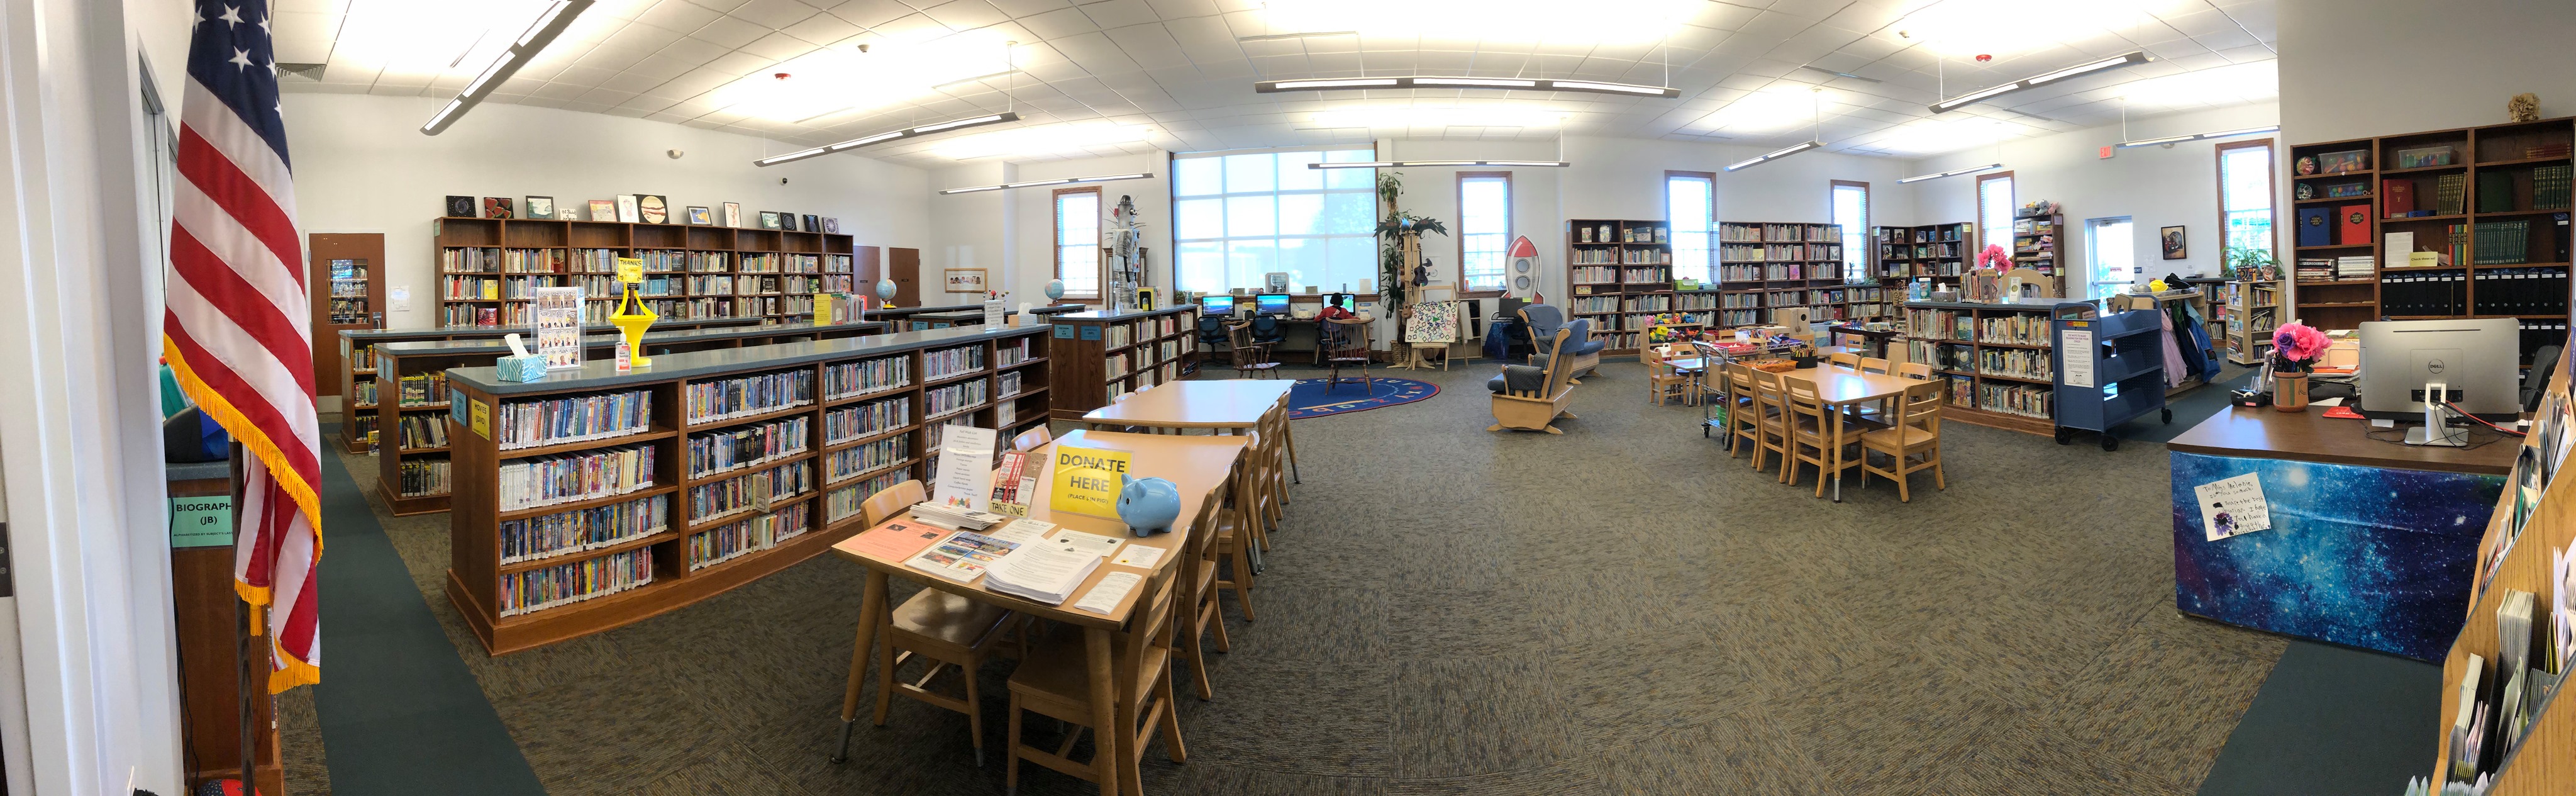 A panorama image of the Library's Children's Room